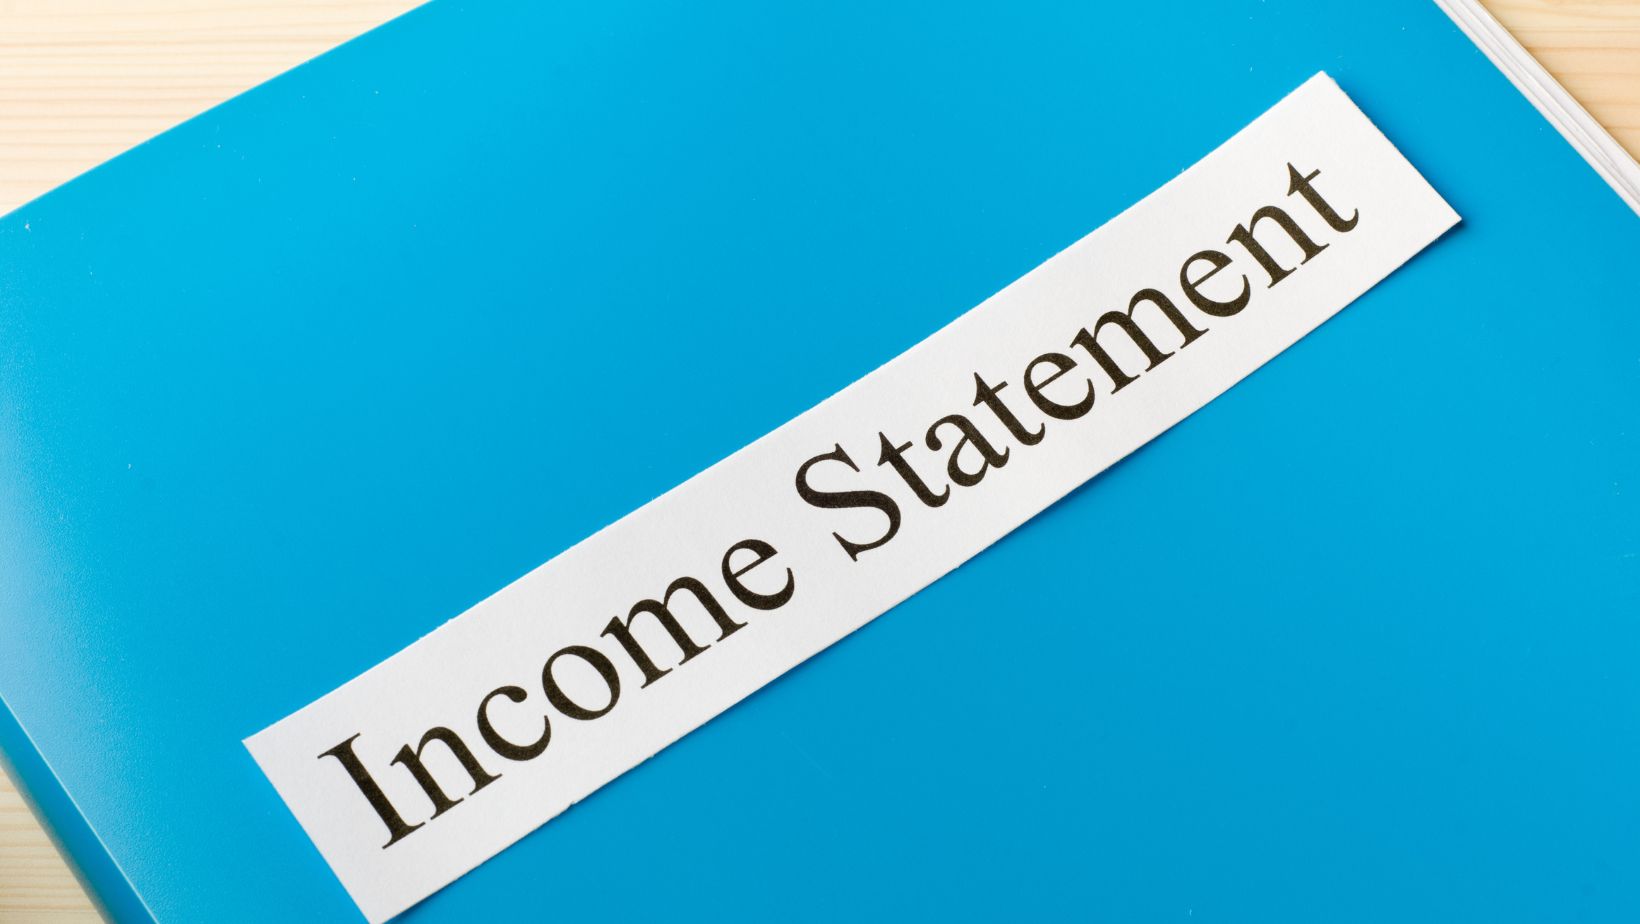 for external reporting, income statements are generally prepared using